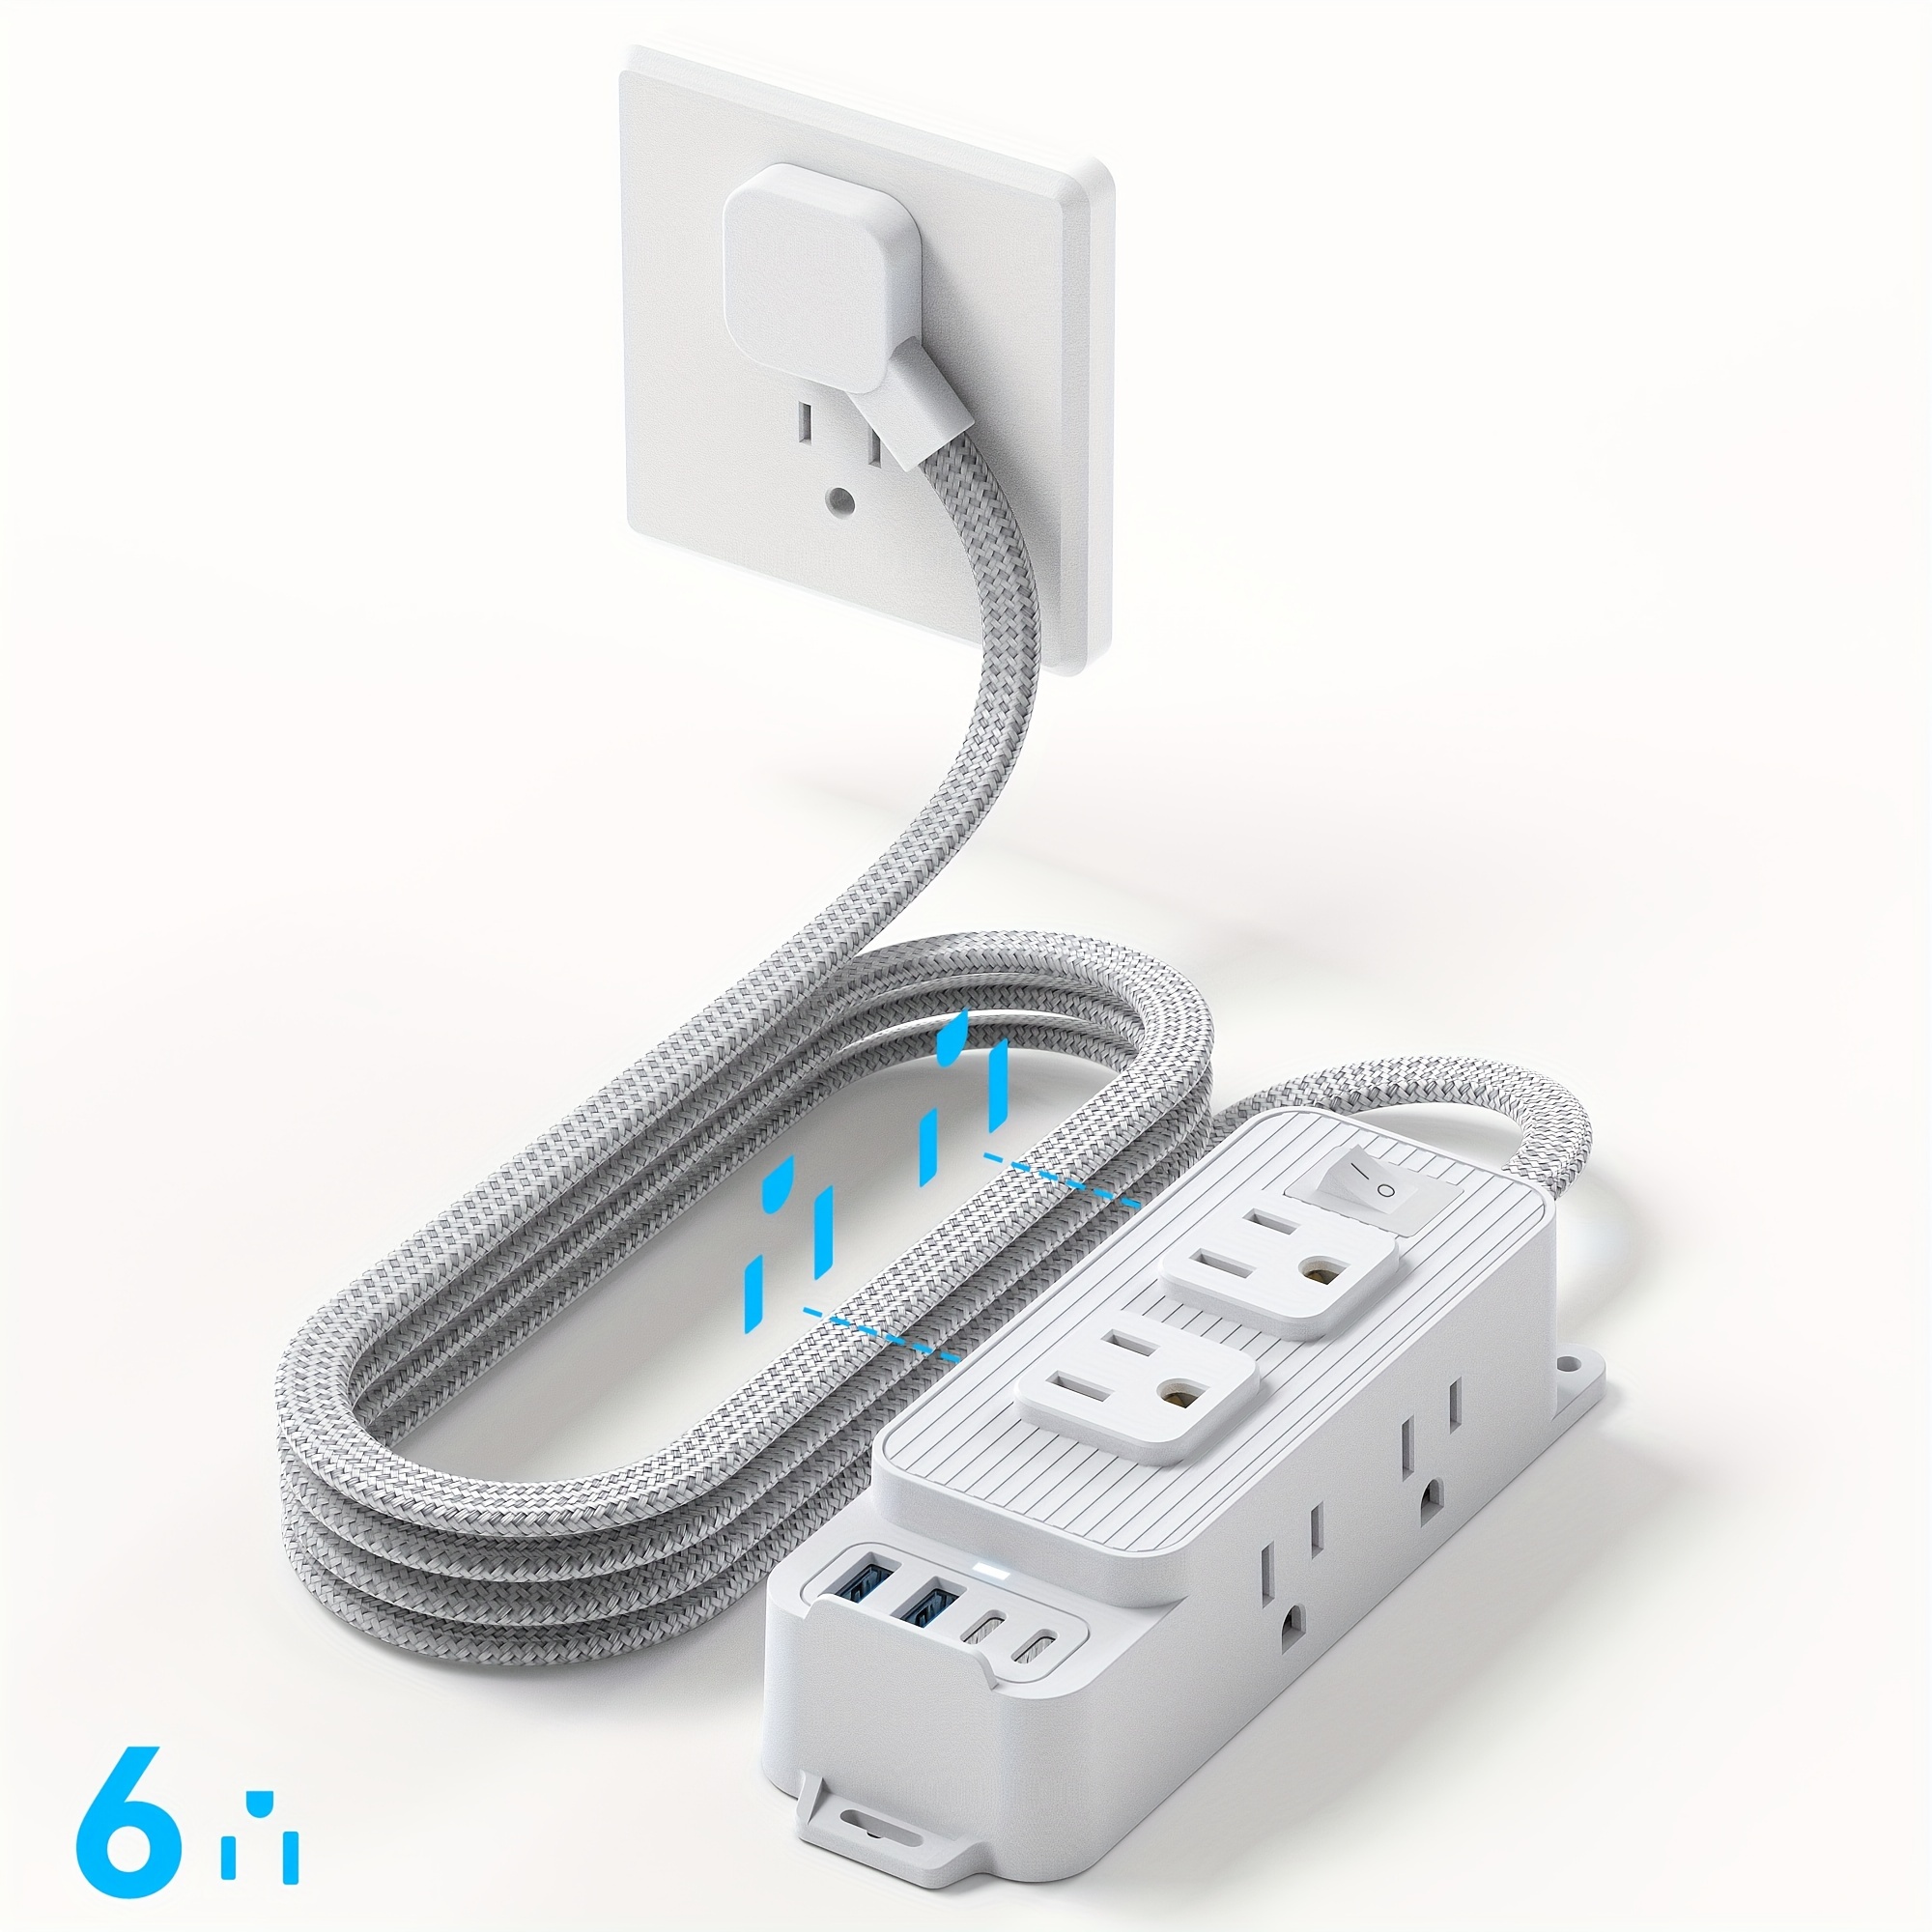 

Power Strip Protector, 5 Ft Cord With 6 Ac Outlets With 4 Usb Ports, Flat Plug, Wall Mount For Home Office Dorm Room Essentials